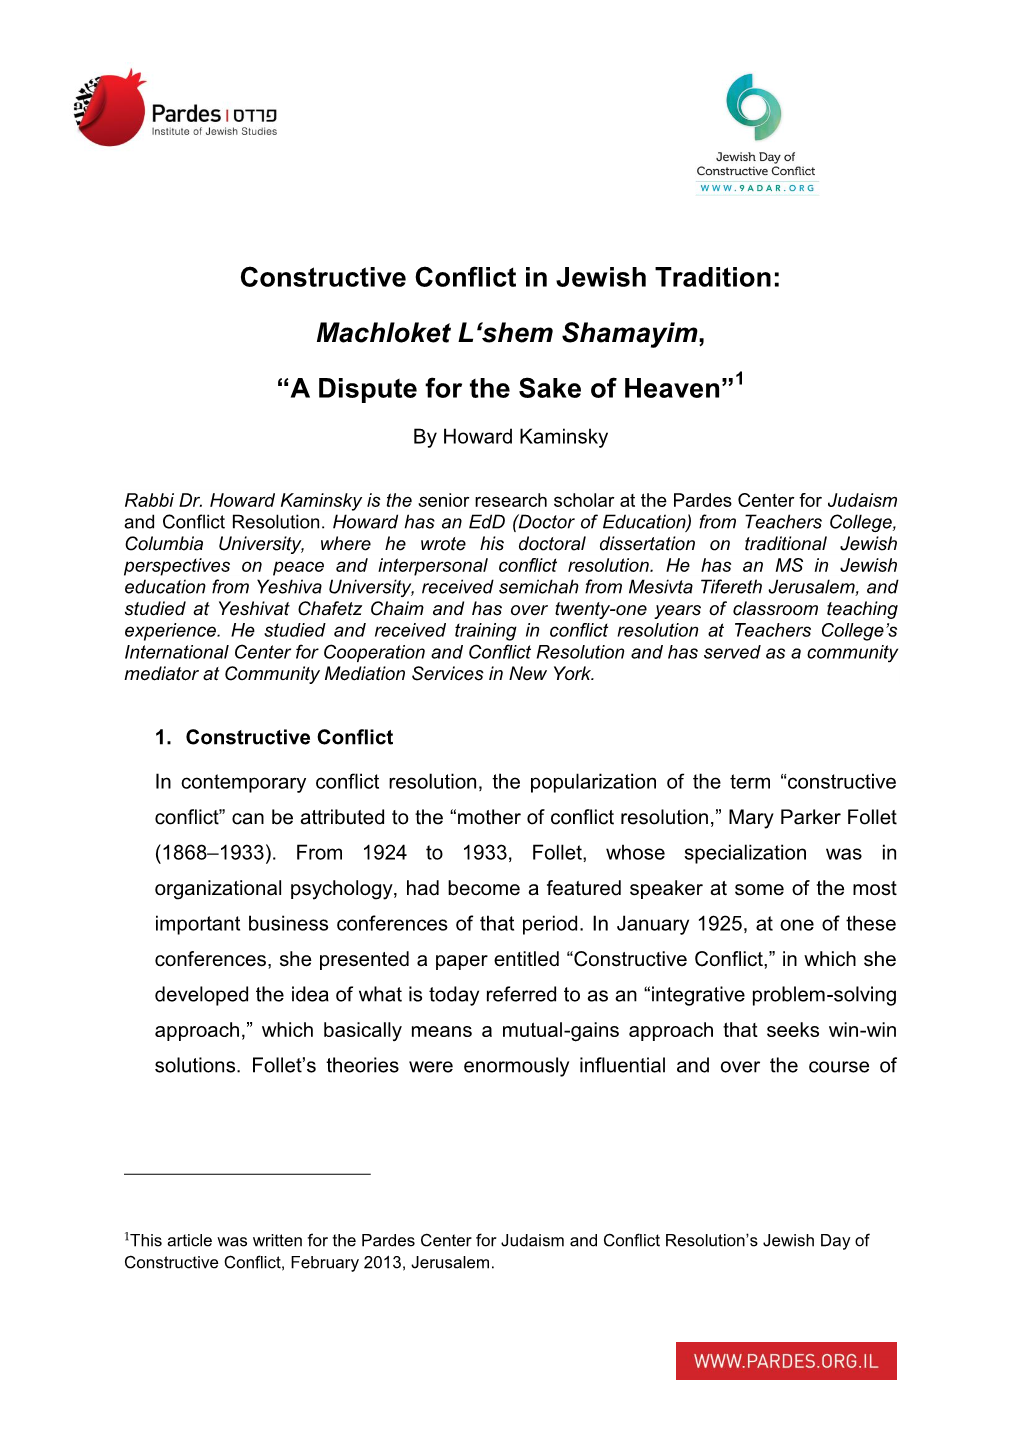 Constructive Conflict in Jewish Tradition